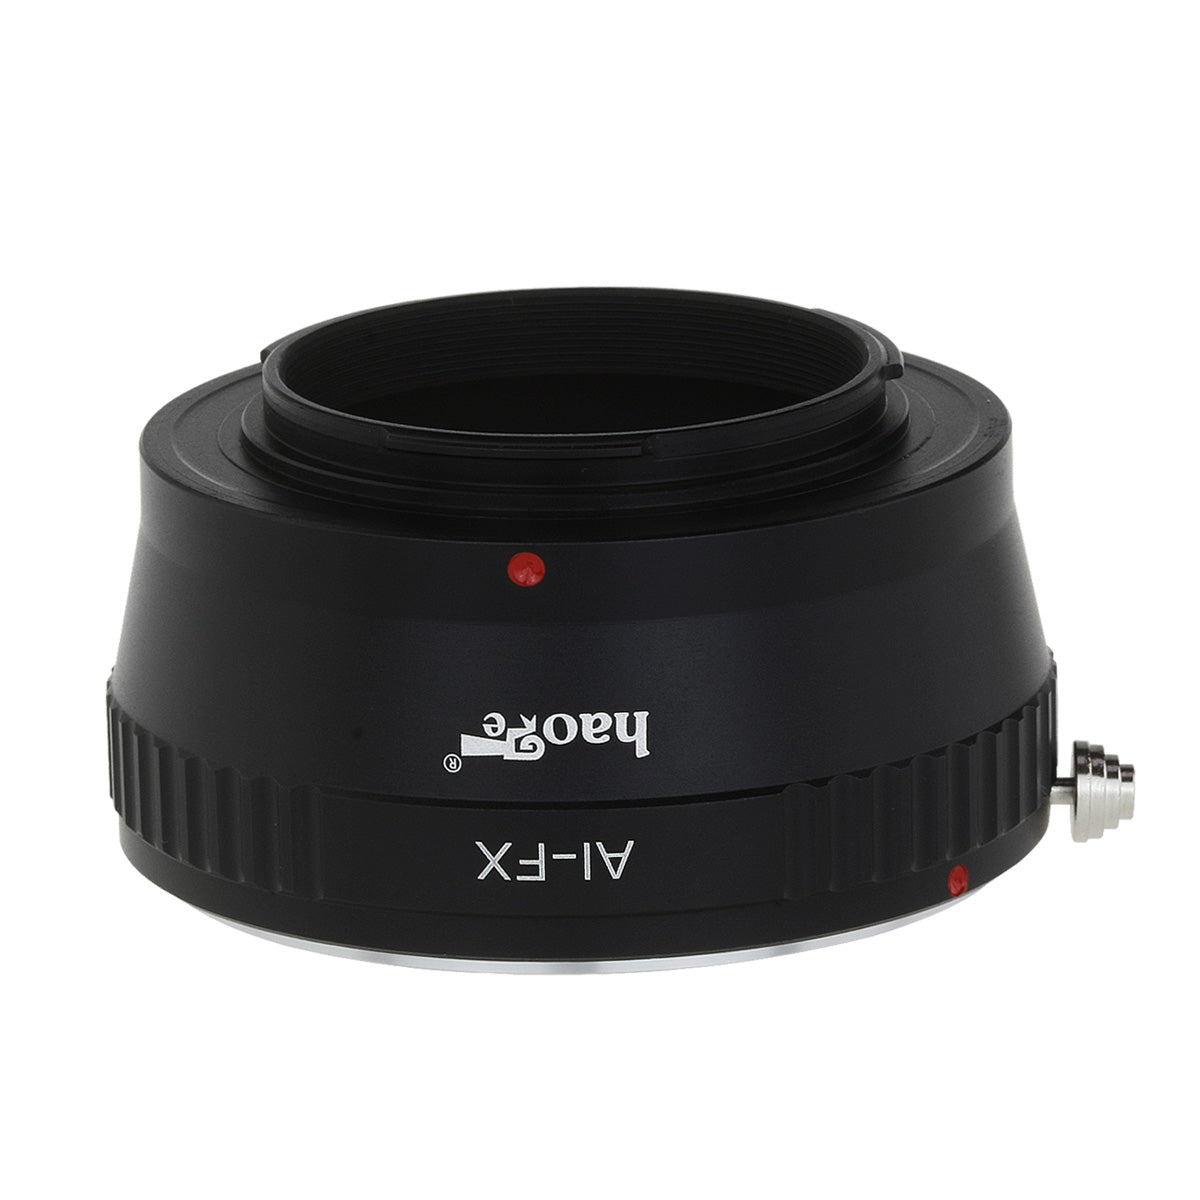 Haoge Lens Mount Adapter for Nikon Nikkor F Mount AI AI-S Lens to Fujifilm X-mount Camera such as X-A1, X-A2, X-A3, X-A10, X-E1, X-E2, X-E2s, X-M1, X-Pro1, X-Pro2, X-T1, X-T2, X-T10, X-T20